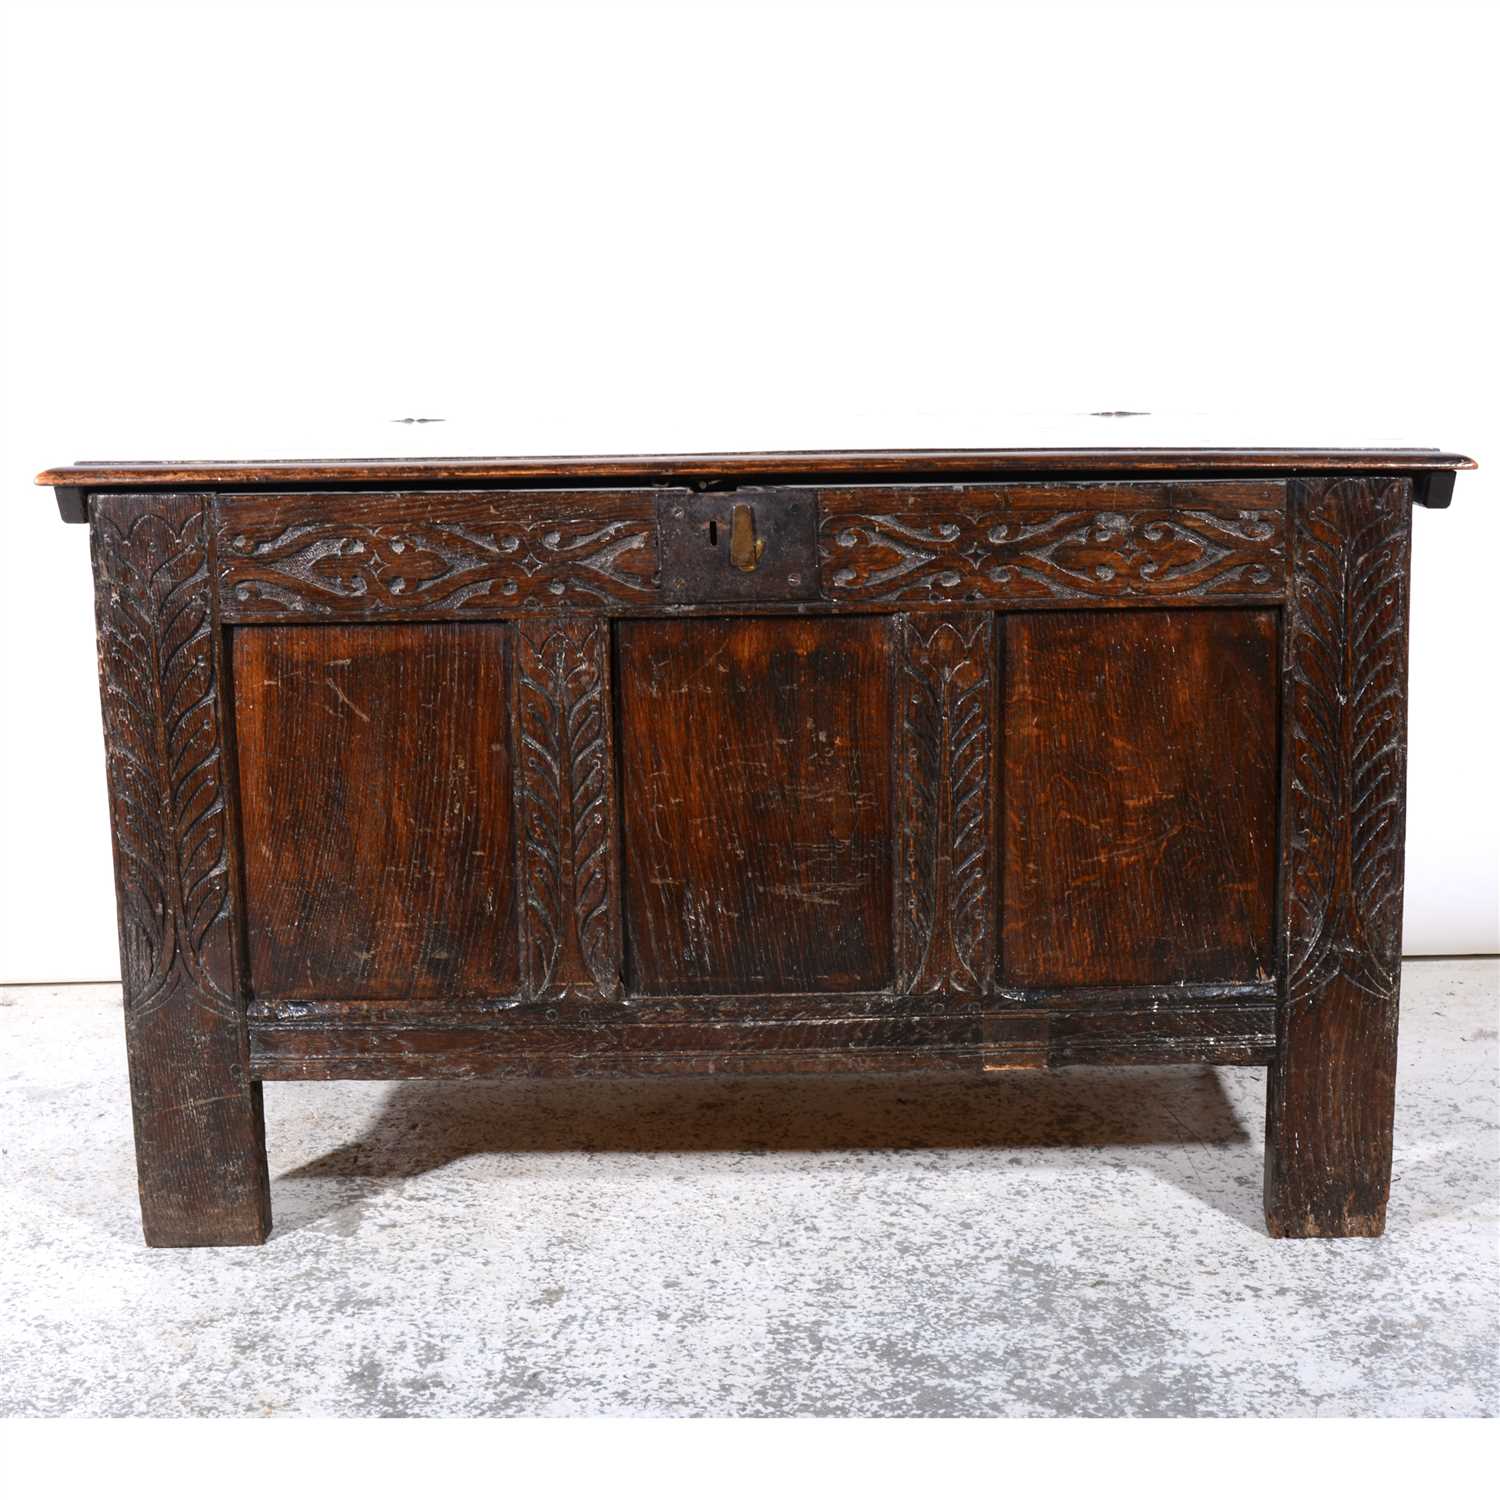 Lot 381 - Joined oak coffer, in part late 17th century